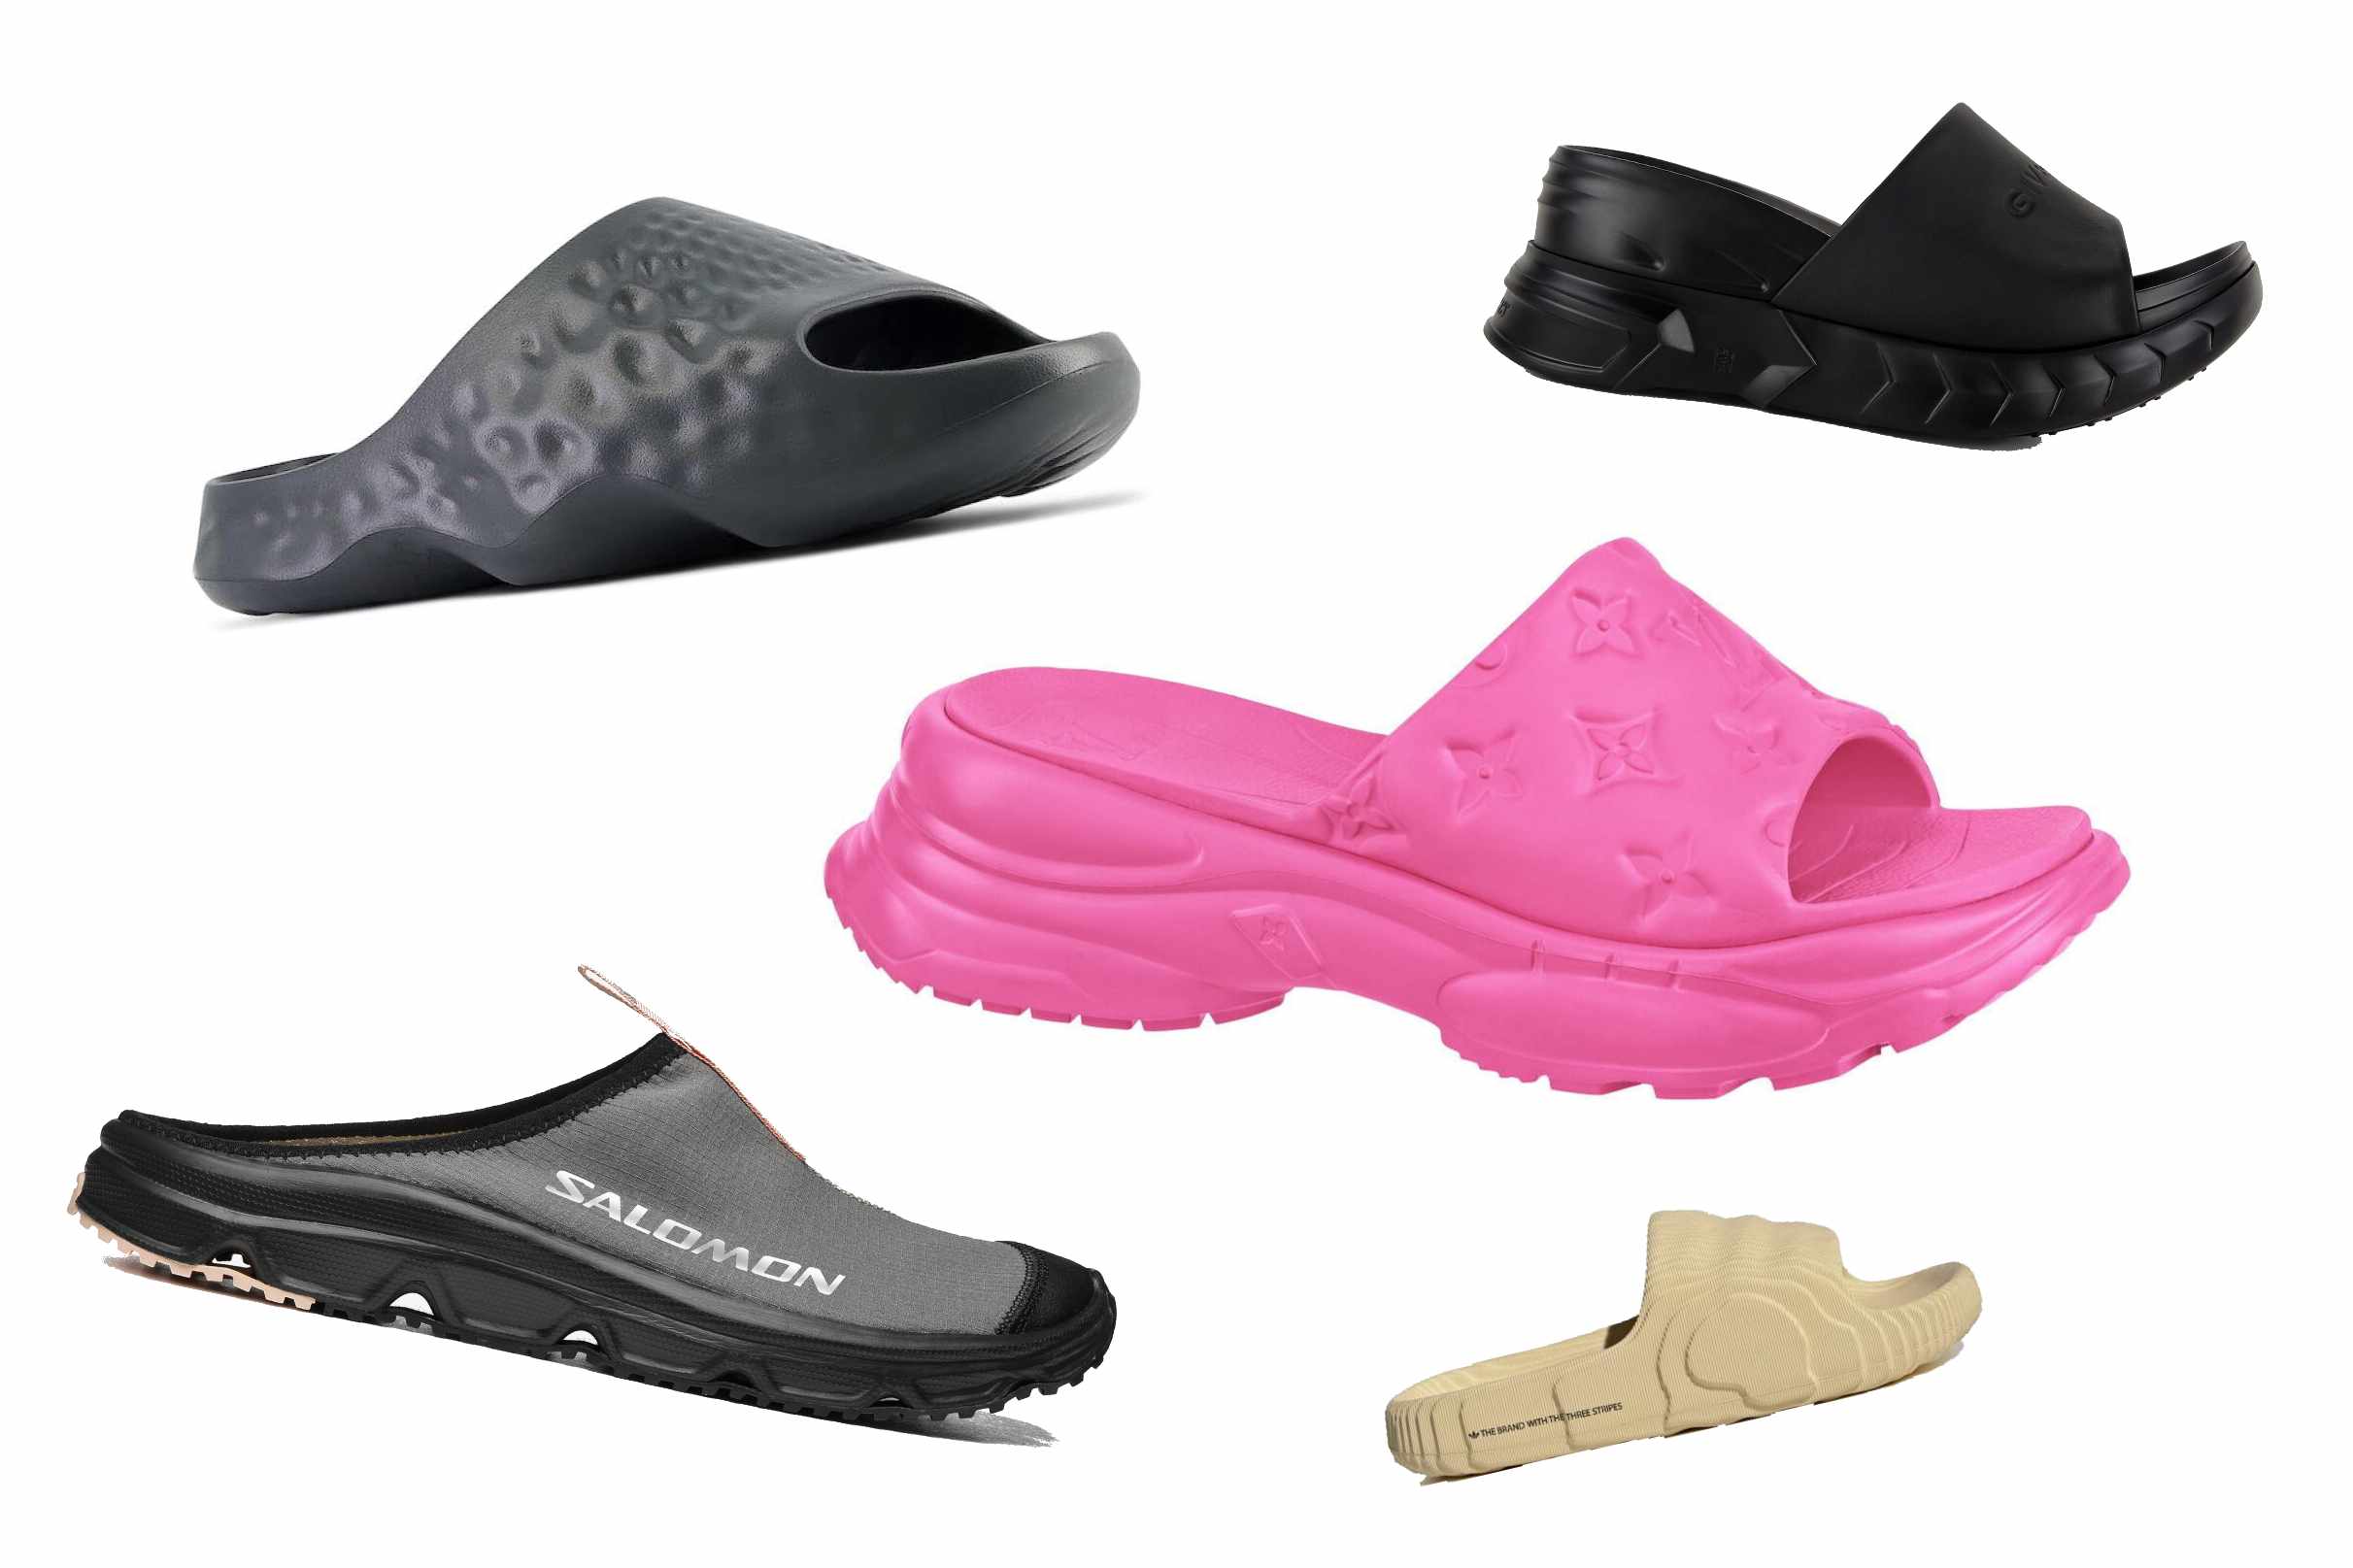 From YEEZY Clones to Louis Vuitton: Recovery Slides Are Booming